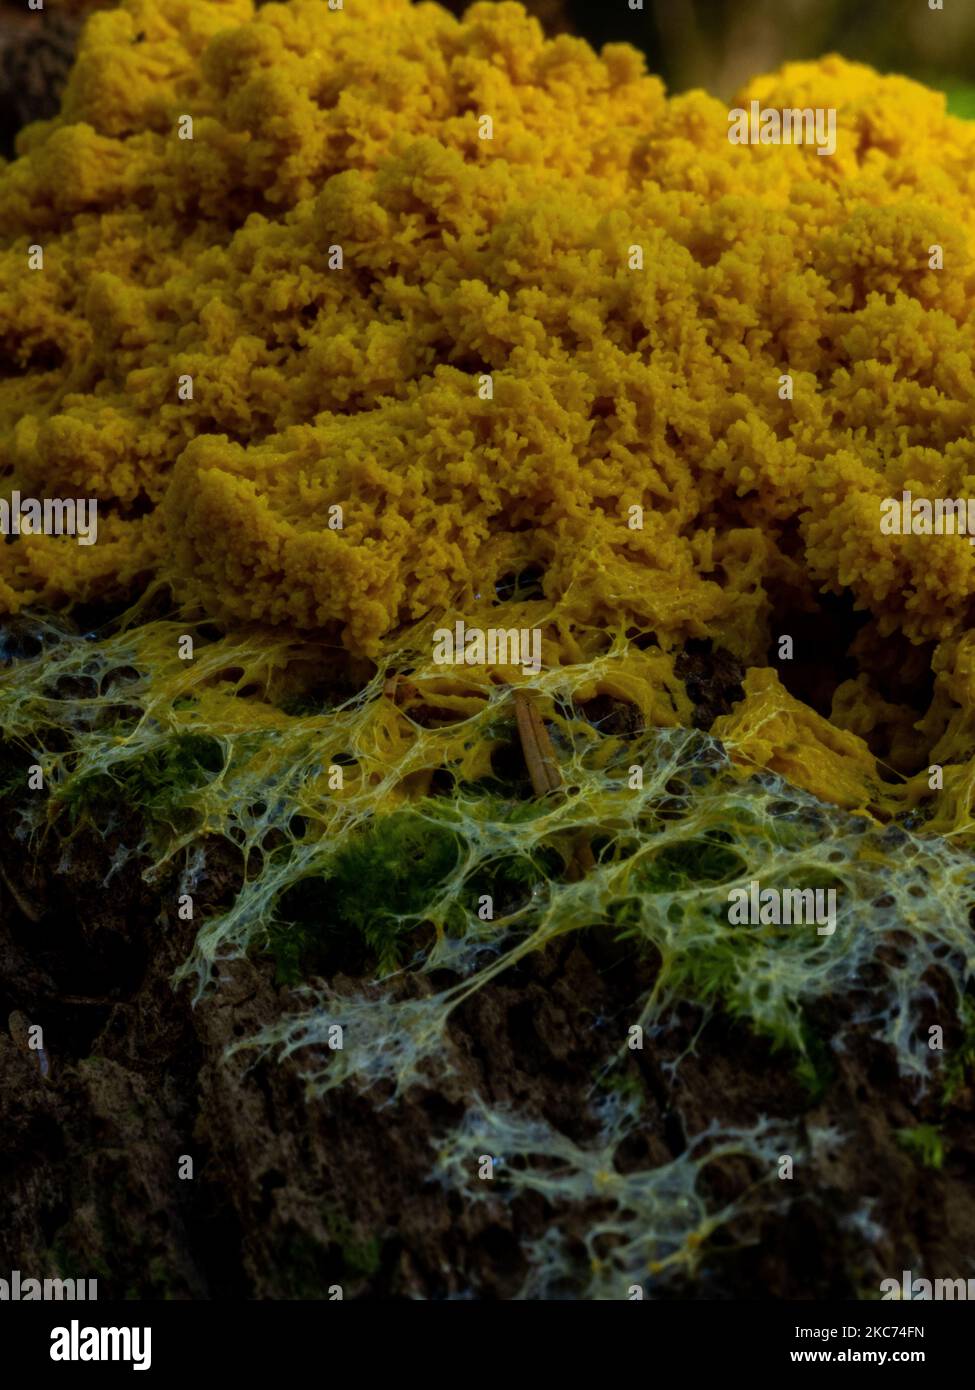 A closeup shot of scrambled egg slime mold on a tree trunk in the daylight Stock Photo